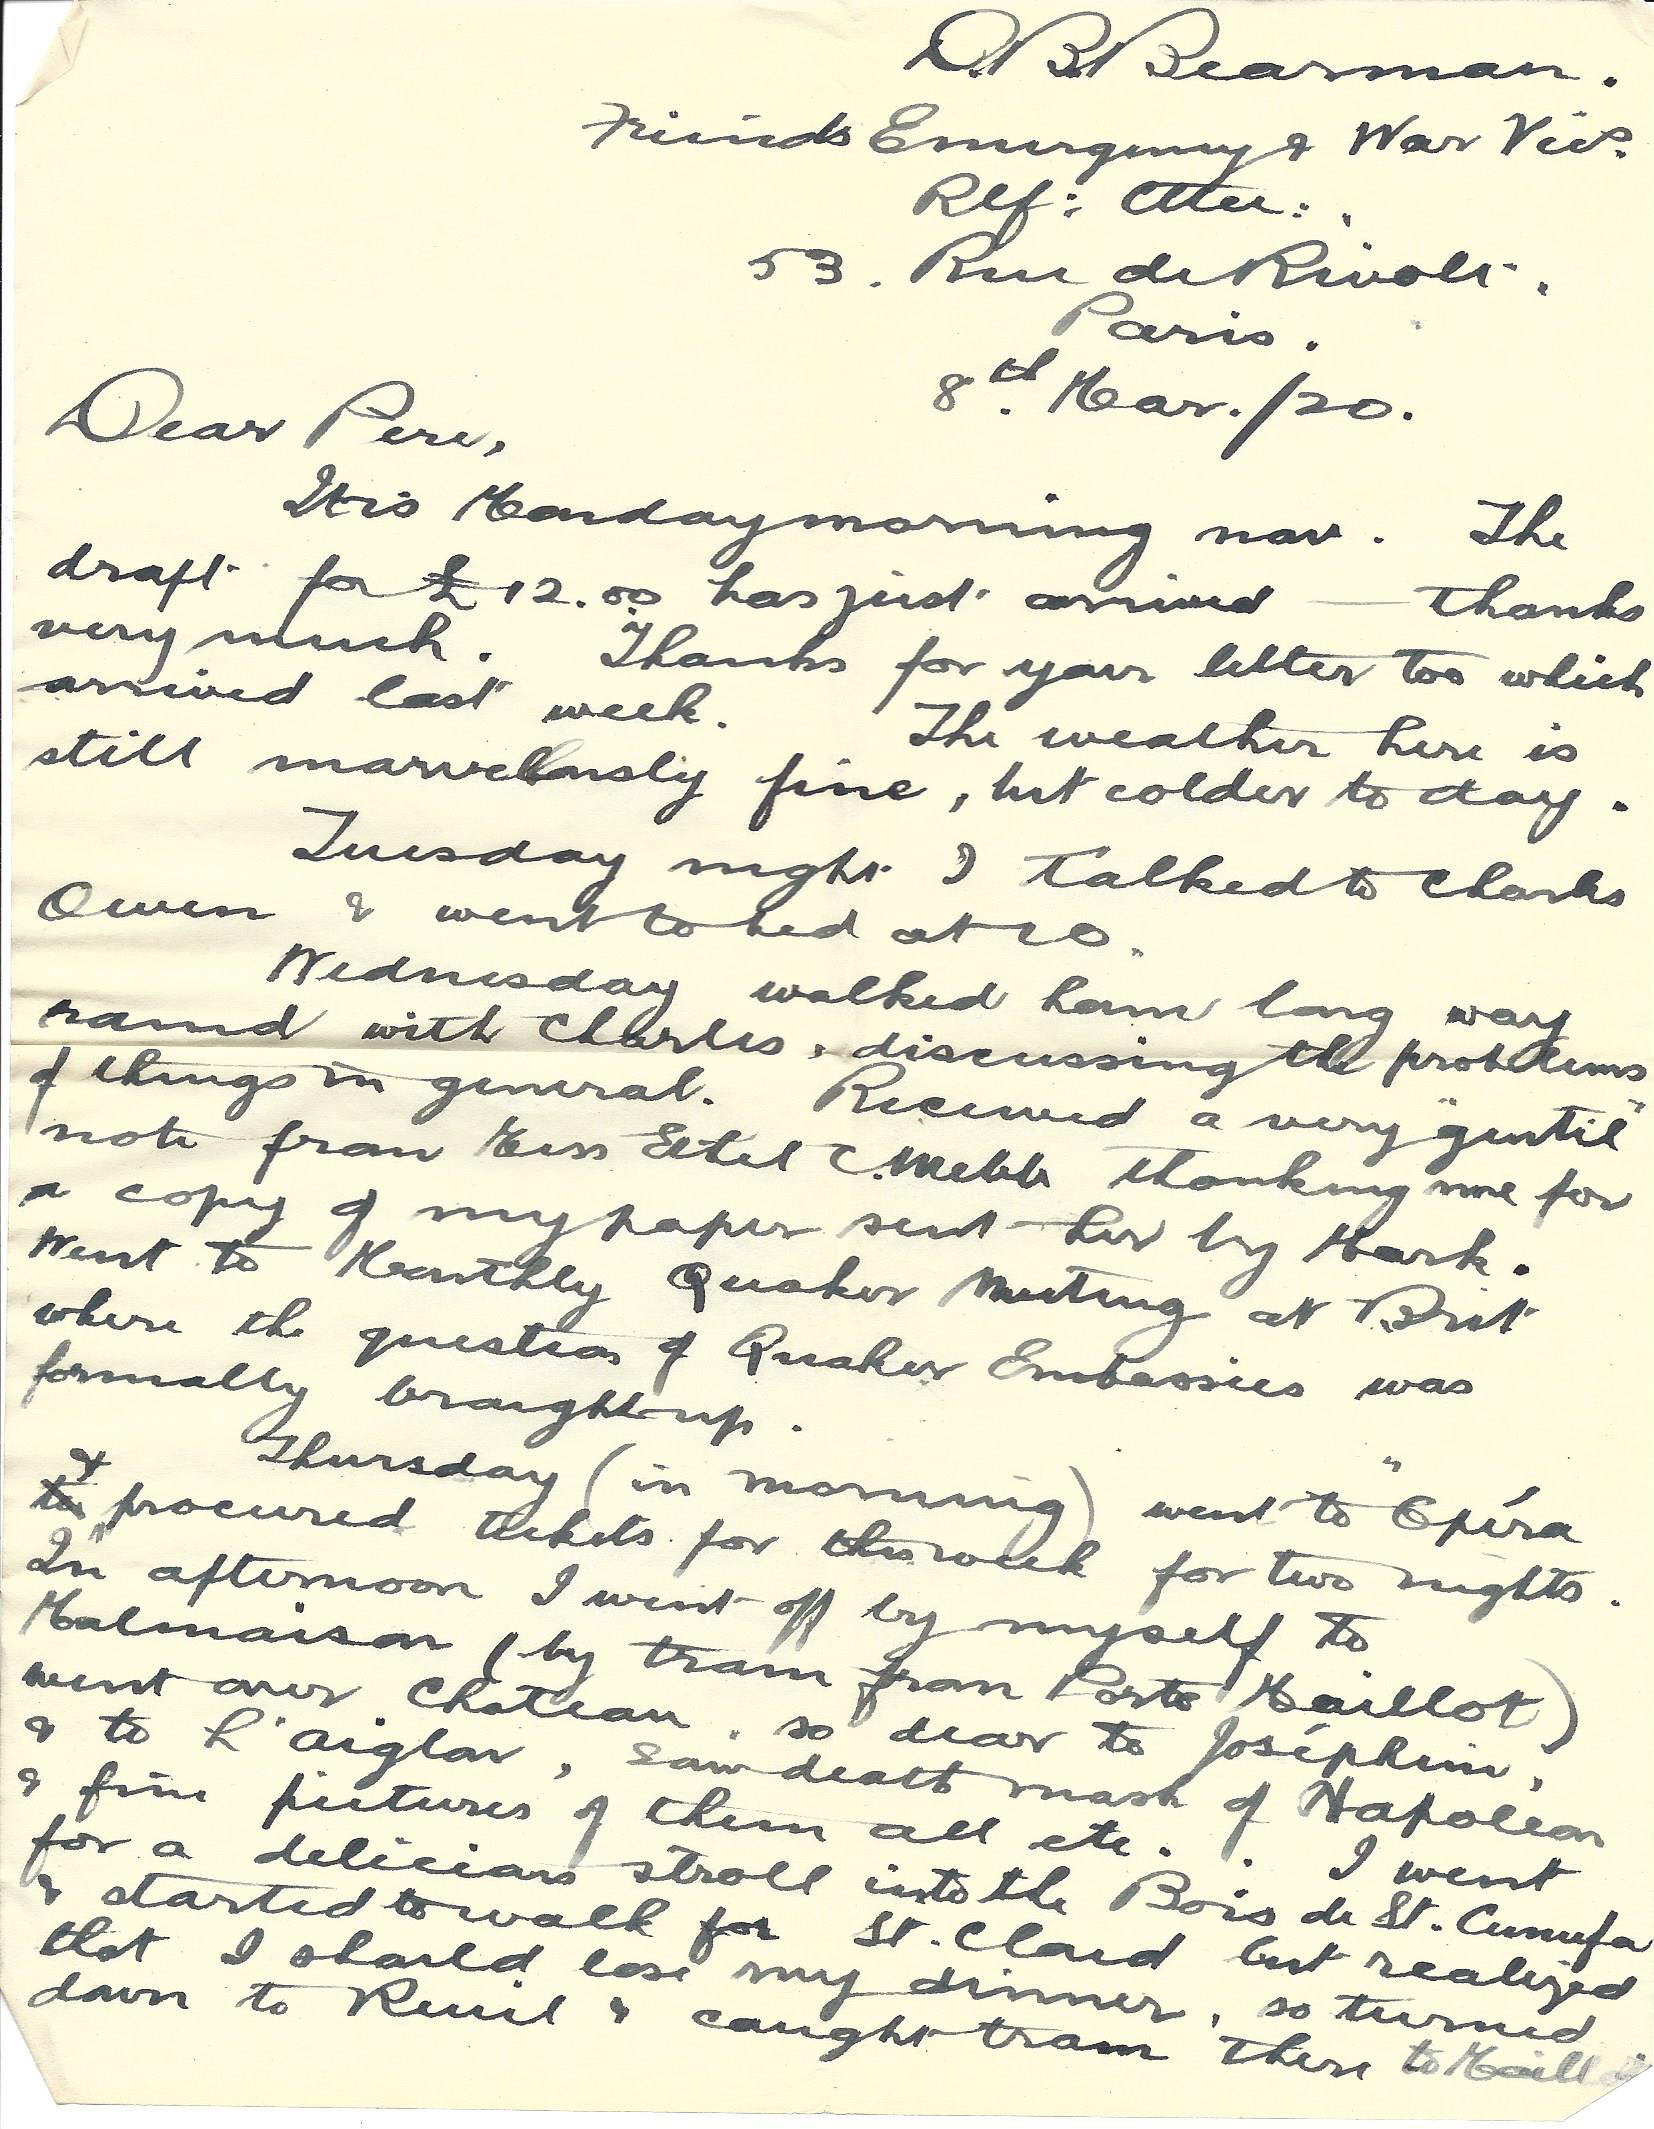 1920-03-08 p1 Donald Bearman letter to his father